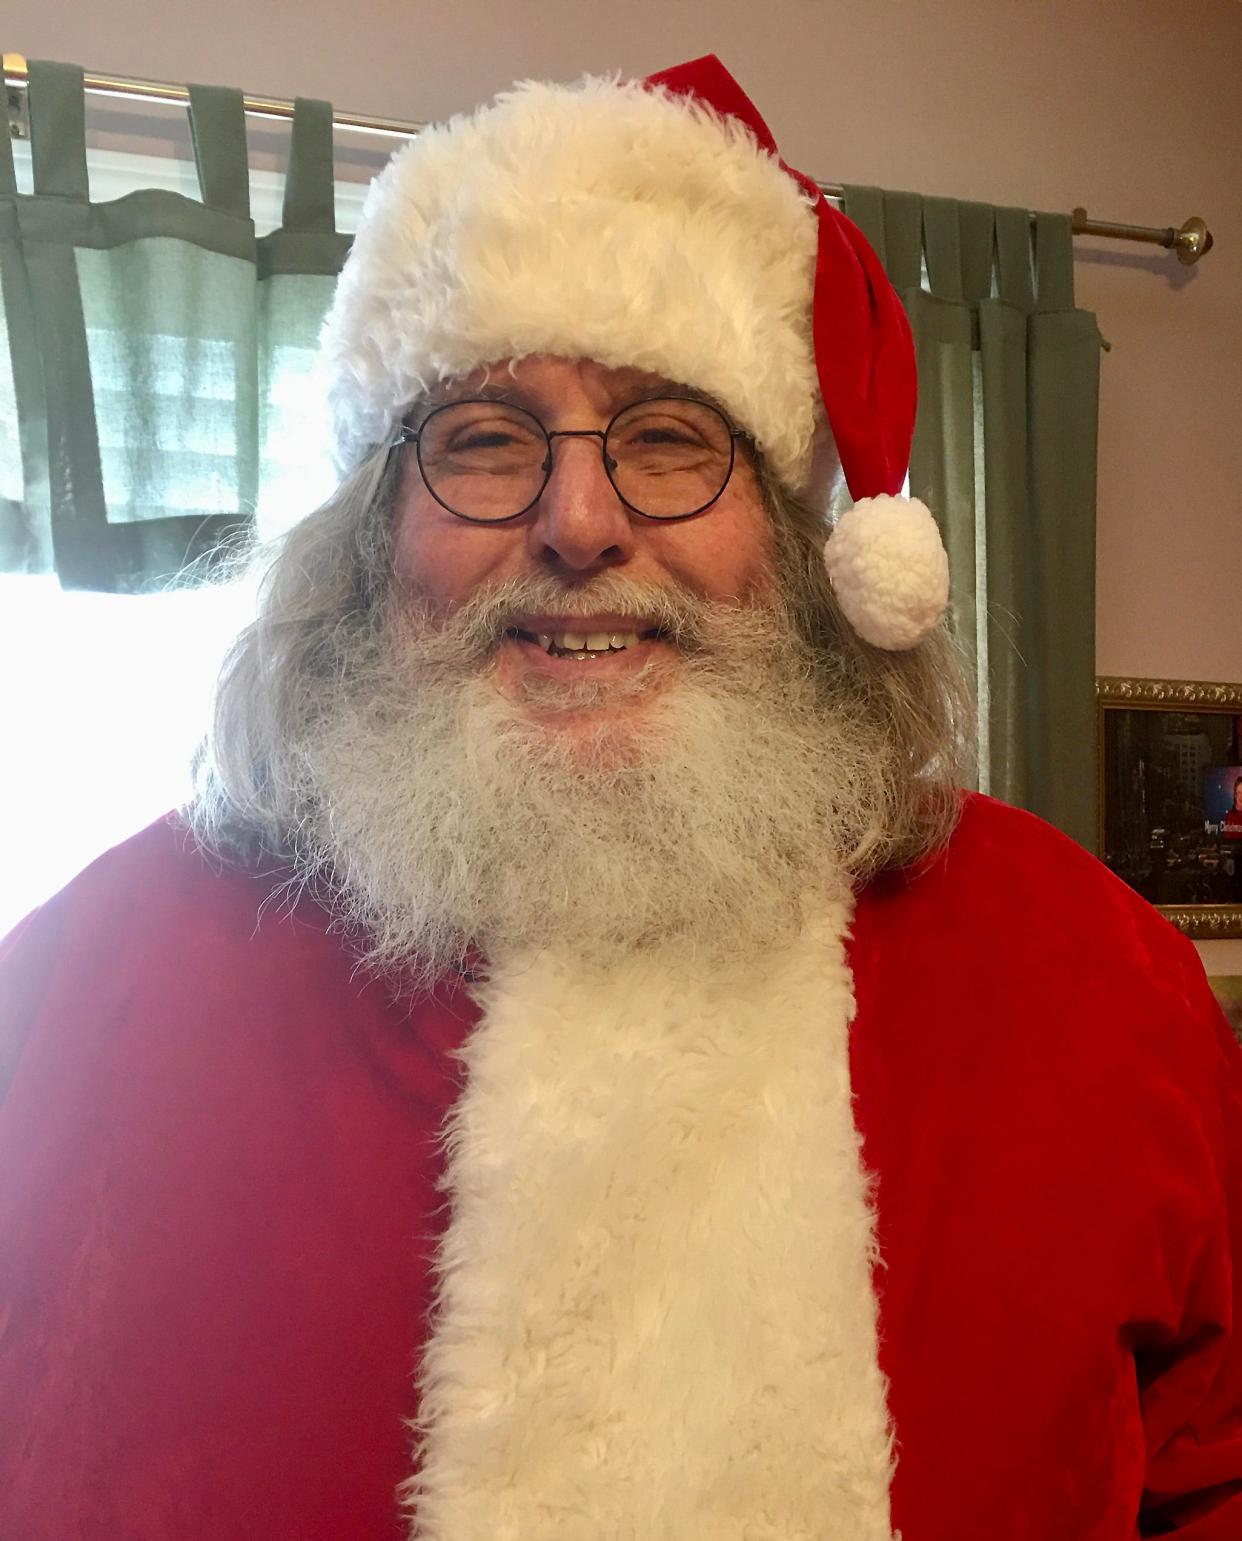 Former Gadsden Police Chief John Crane, who now is interim director at the Humane Society Pet Rescue and Adoption Center, says playing Santa Claus is the best job he's had.